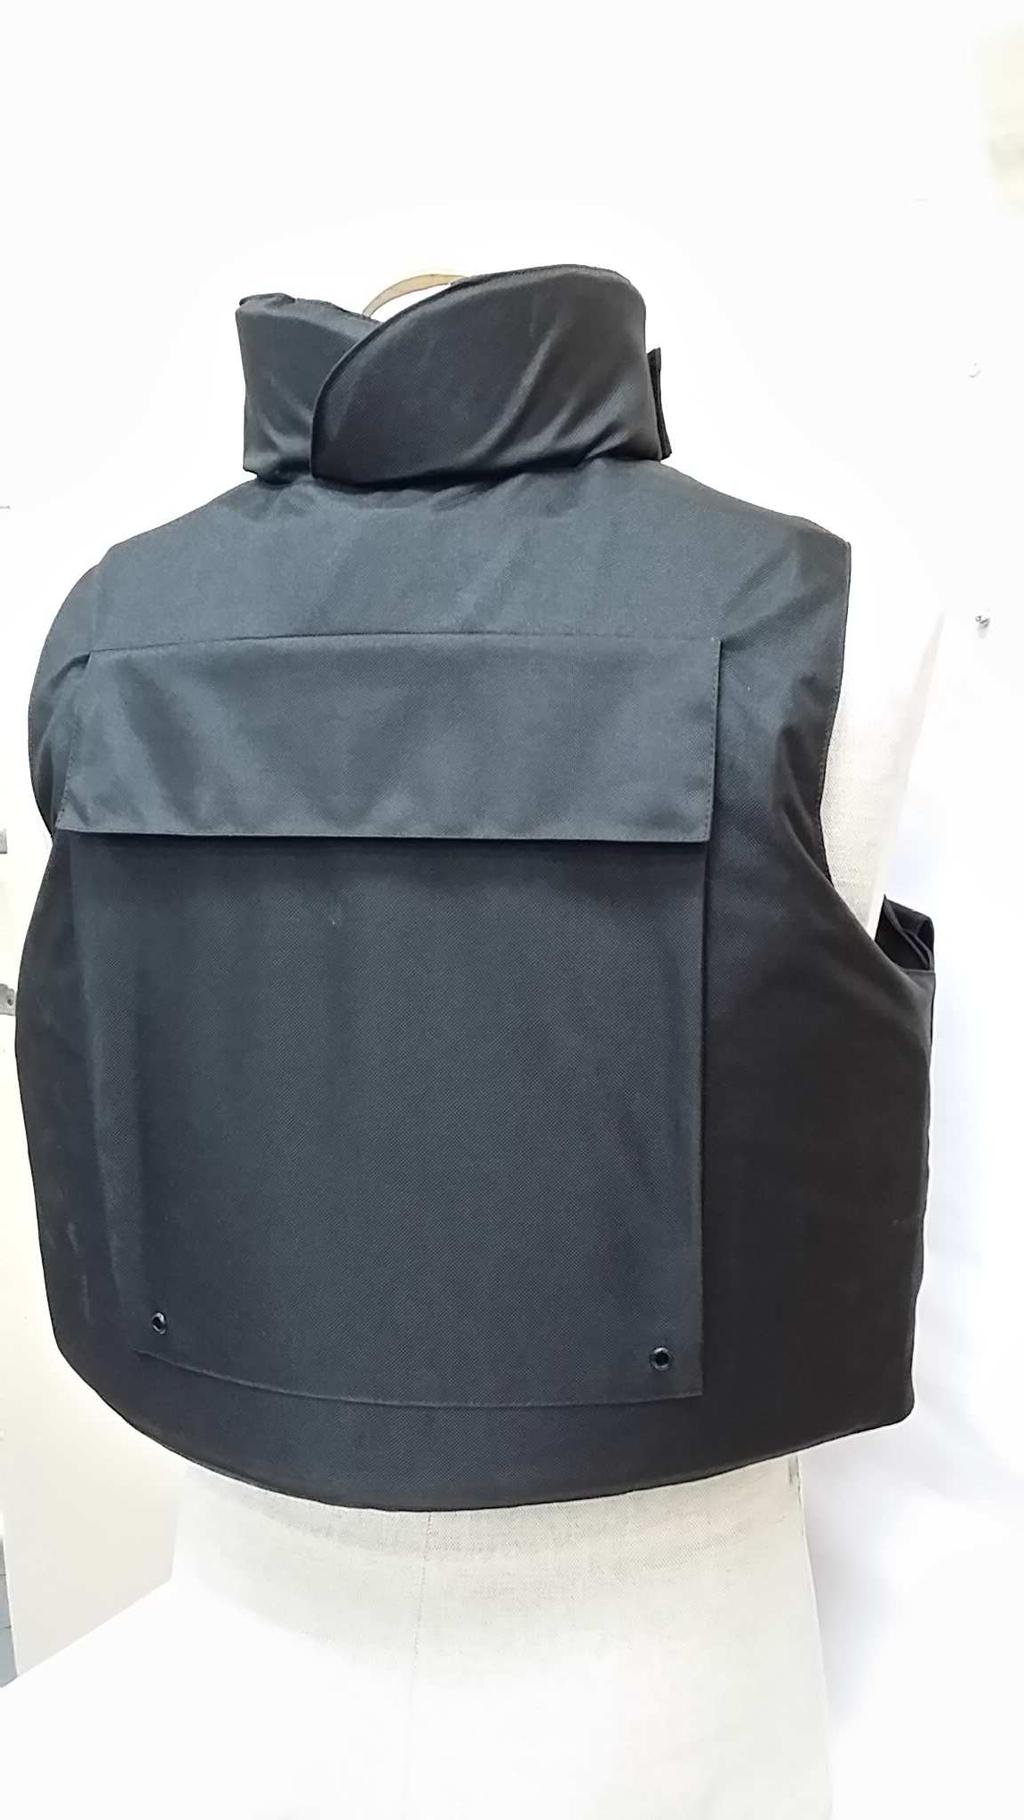 additionnal front pockets 3:3"x8" 1:3"x7" *Advance velcro system *Right shoulder point, fixed left shoulder *Adjustable waist point right side, fixed left side *Quick release for rapid removal